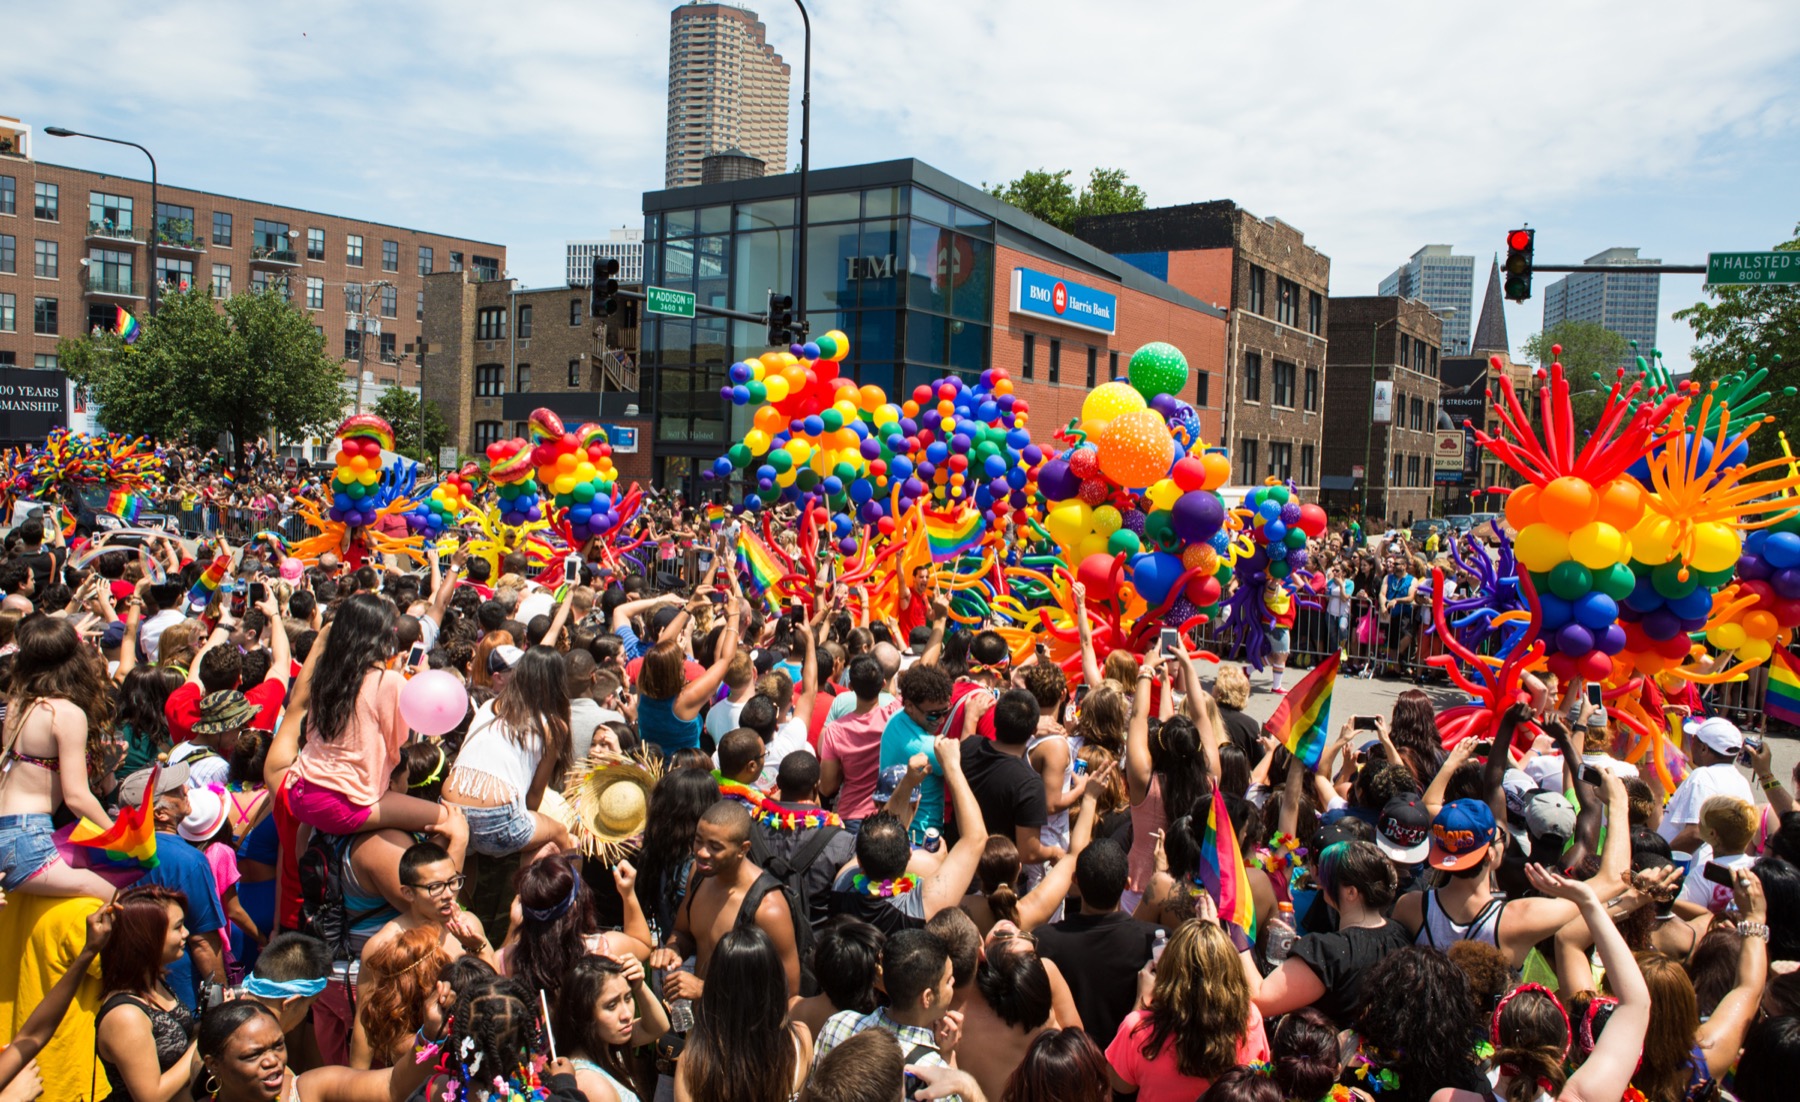 Parade marchers wil rainbow balloons at the Chicago Pride Parade